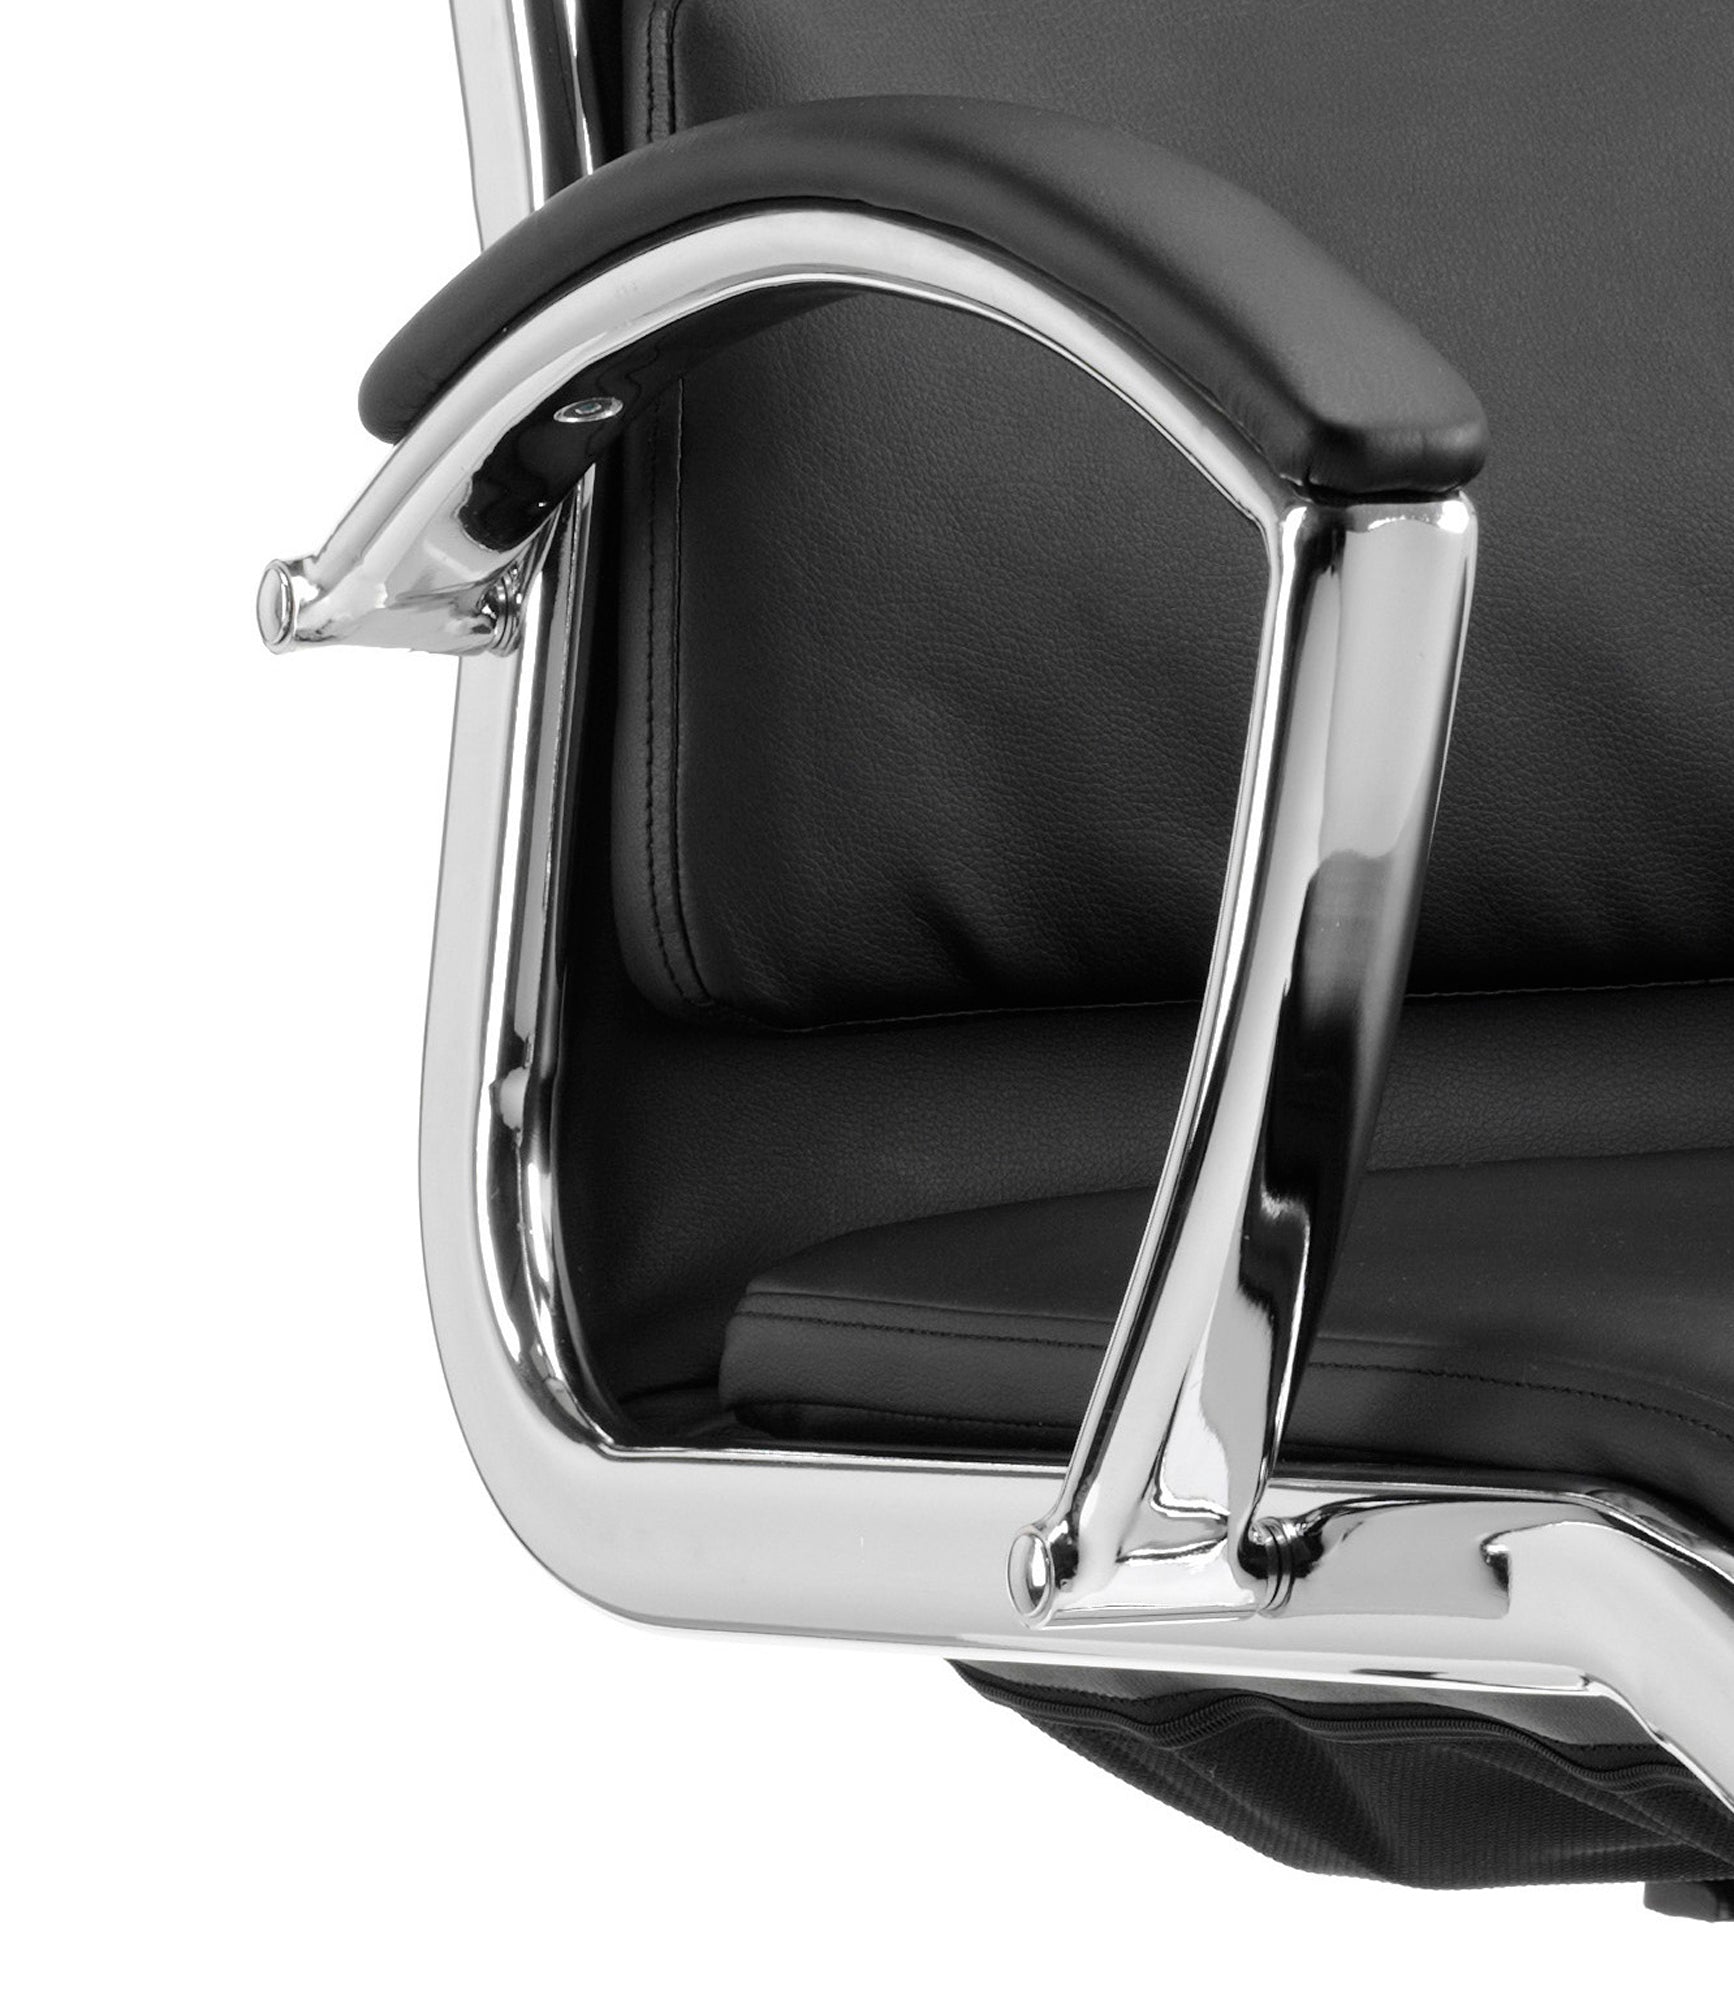 Classic Executive Office Chair with Arms